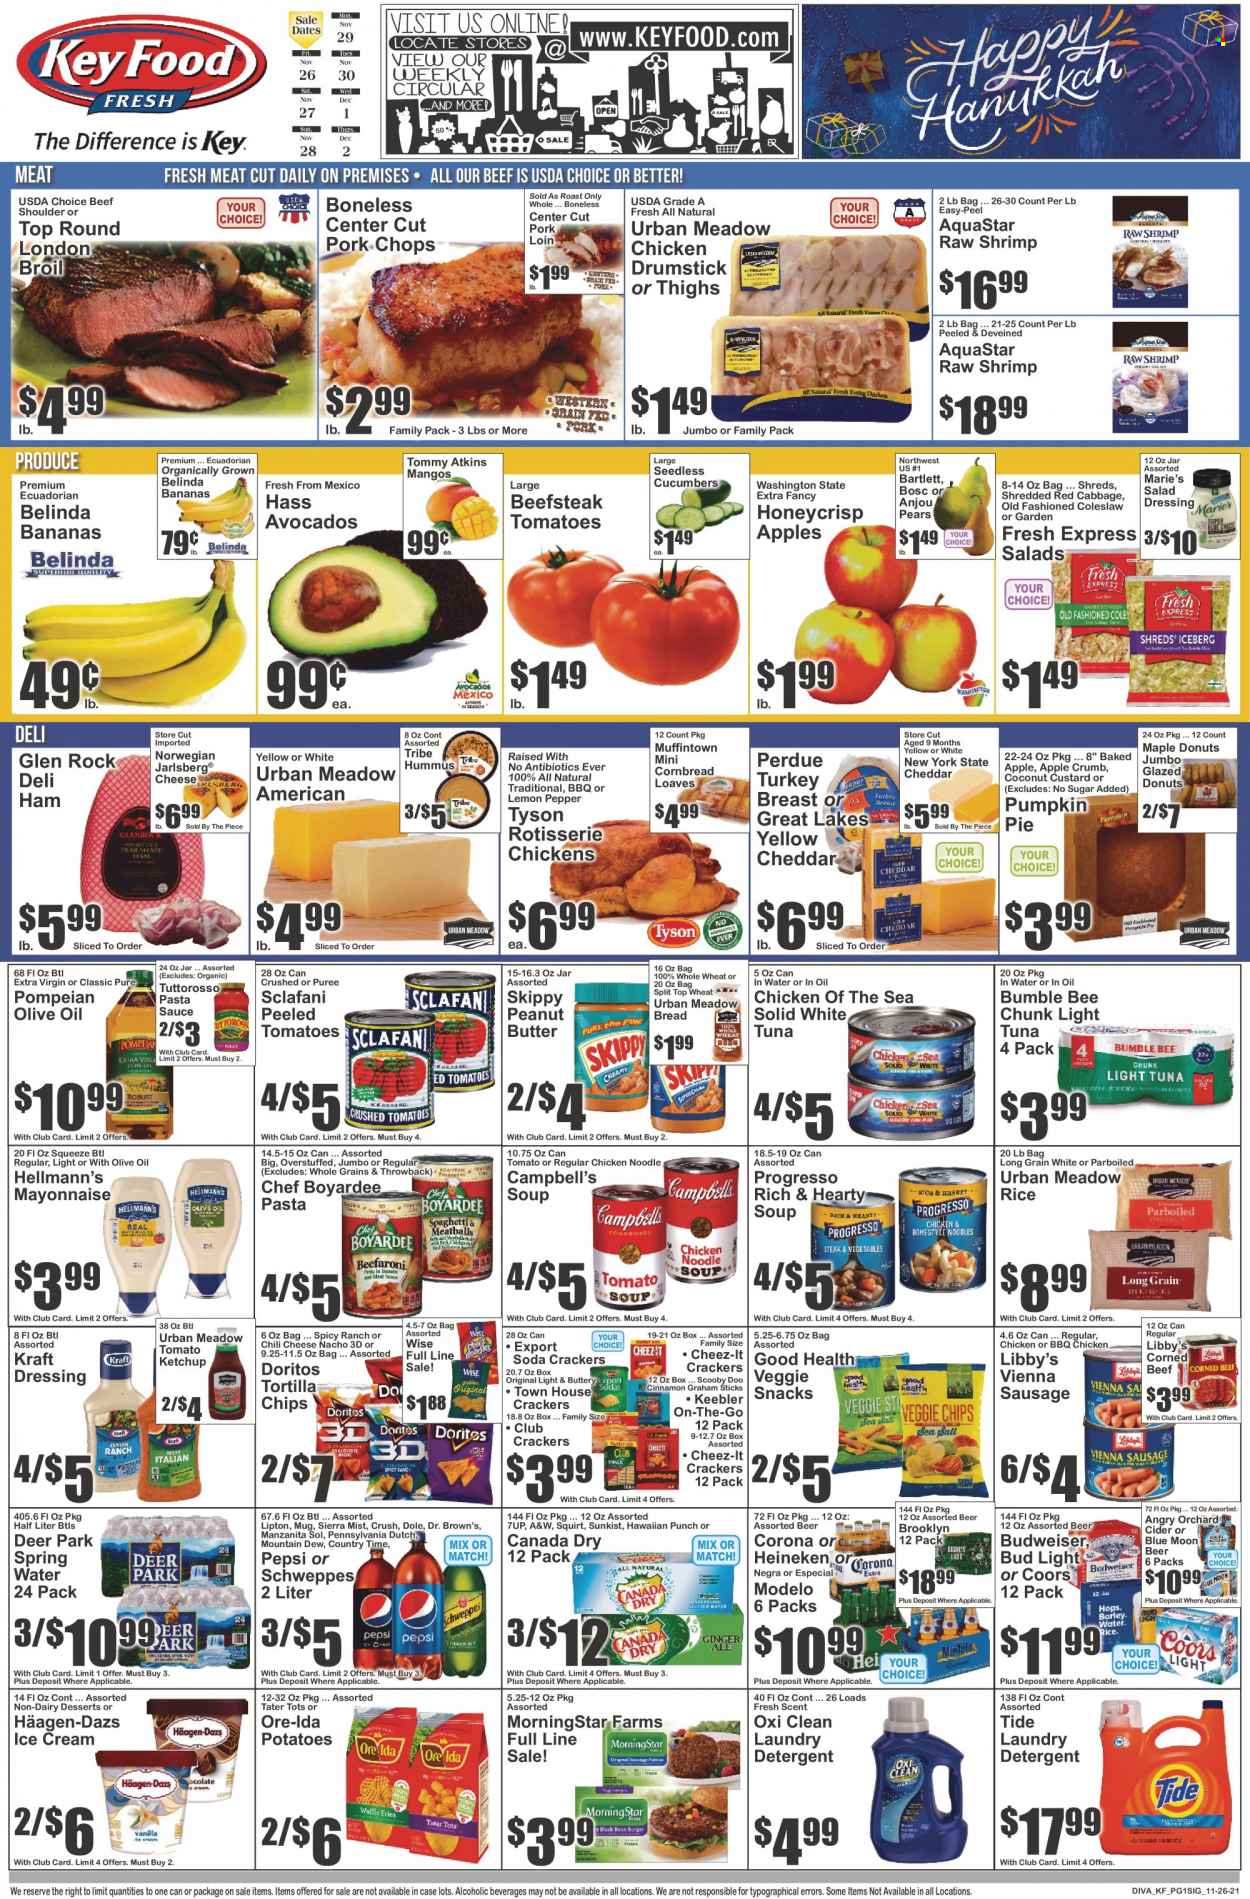 thumbnail - Key Food Flyer - 11/26/2021 - 12/02/2021 - Sales products - bread, pie, corn bread, donut, cucumber, tomatoes, potatoes, pumpkin, Dole, apples, avocado, pears, tuna, shrimps, Campbell's, coleslaw, pasta sauce, soup, Bumble Bee, sauce, noodles, Progresso, MorningStar Farms, Perdue®, Kraft®, ham, sausage, vienna sausage, hummus, corned beef, custard, mayonnaise, Hellmann’s, ice cream, Häagen-Dazs, Ore-Ida, tater tots, snack, crackers, Keebler, Doritos, tortilla chips, chips, Cheez-It, light tuna, Chicken of the Sea, Chef Boyardee, rice, cinnamon, salad dressing, ketchup, dressing, extra virgin olive oil, peanut butter, Canada Dry, Mountain Dew, Schweppes, Pepsi, Lipton, 7UP, Dr. Brown's, A&W, Sierra Mist, Country Time, spring water, soda, cider, beer, Bud Light, Corona Extra, Heineken, Modelo, turkey breast, beef meat, pork chops, pork meat, detergent, Tide, laundry detergent, mug, Budweiser, Coors, Blue Moon. Page 1.